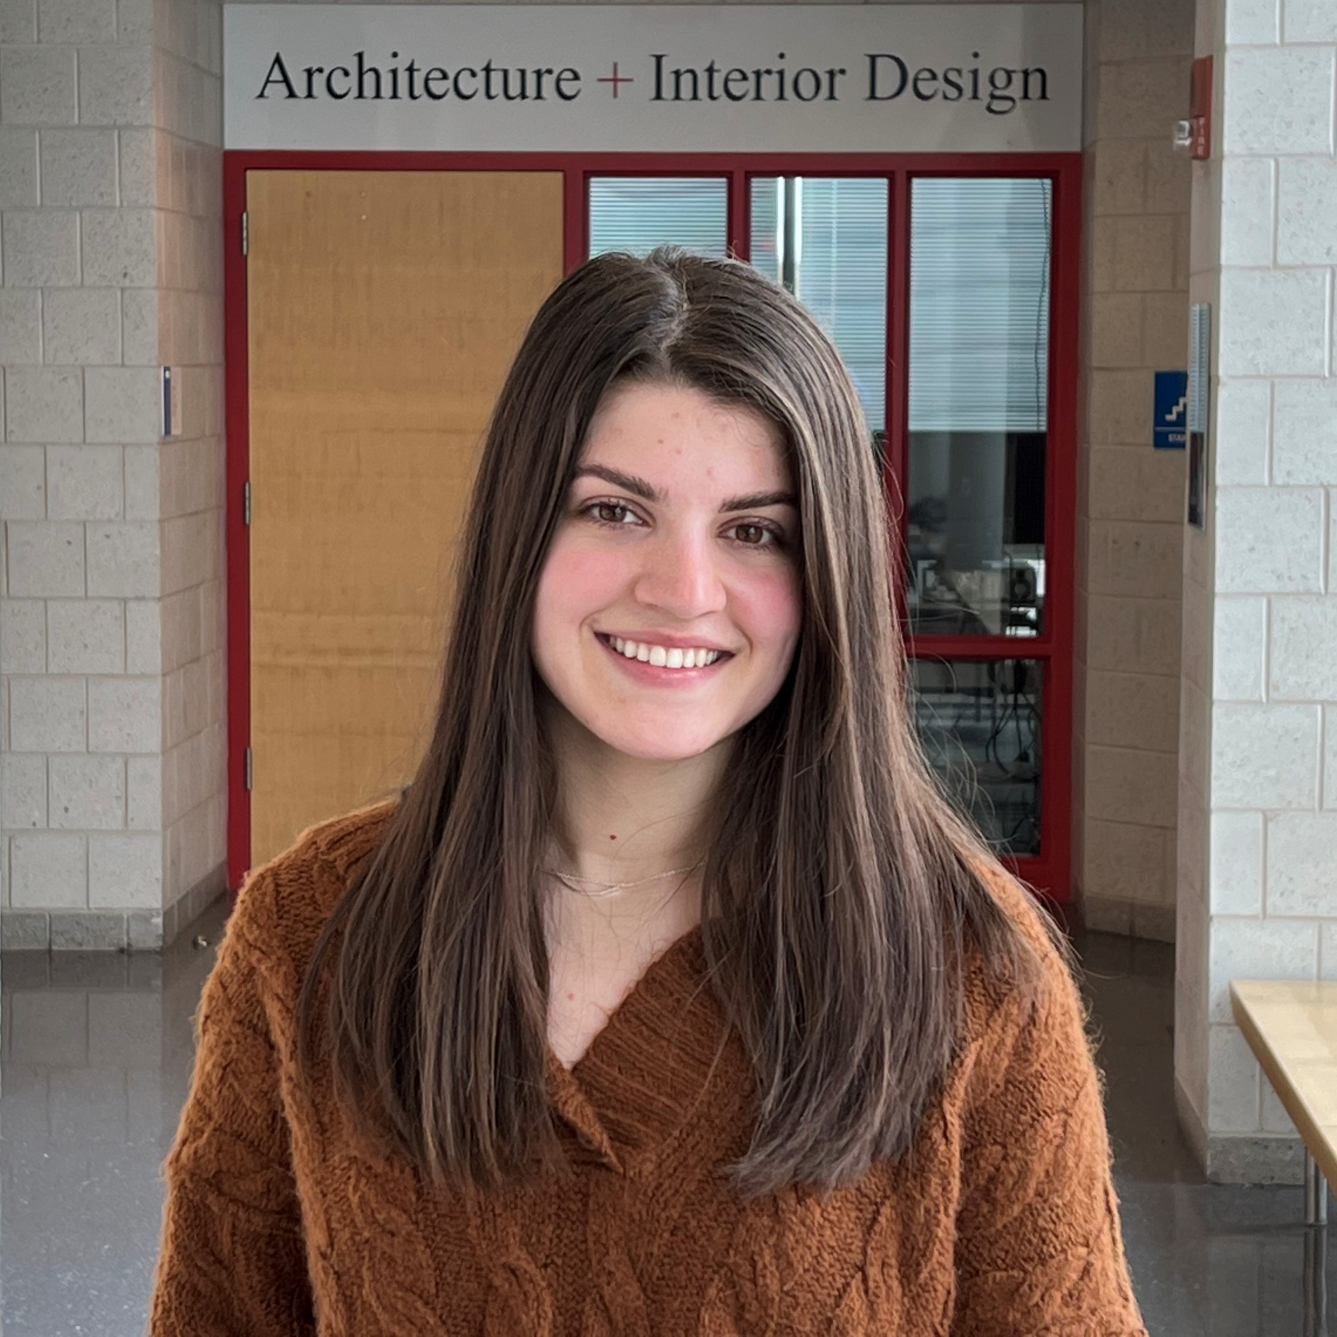 Kenna Maring will complete her Architectural Technology degree next month. She's pictured on the 3rd floor of the Whitney Applied Technology Center.